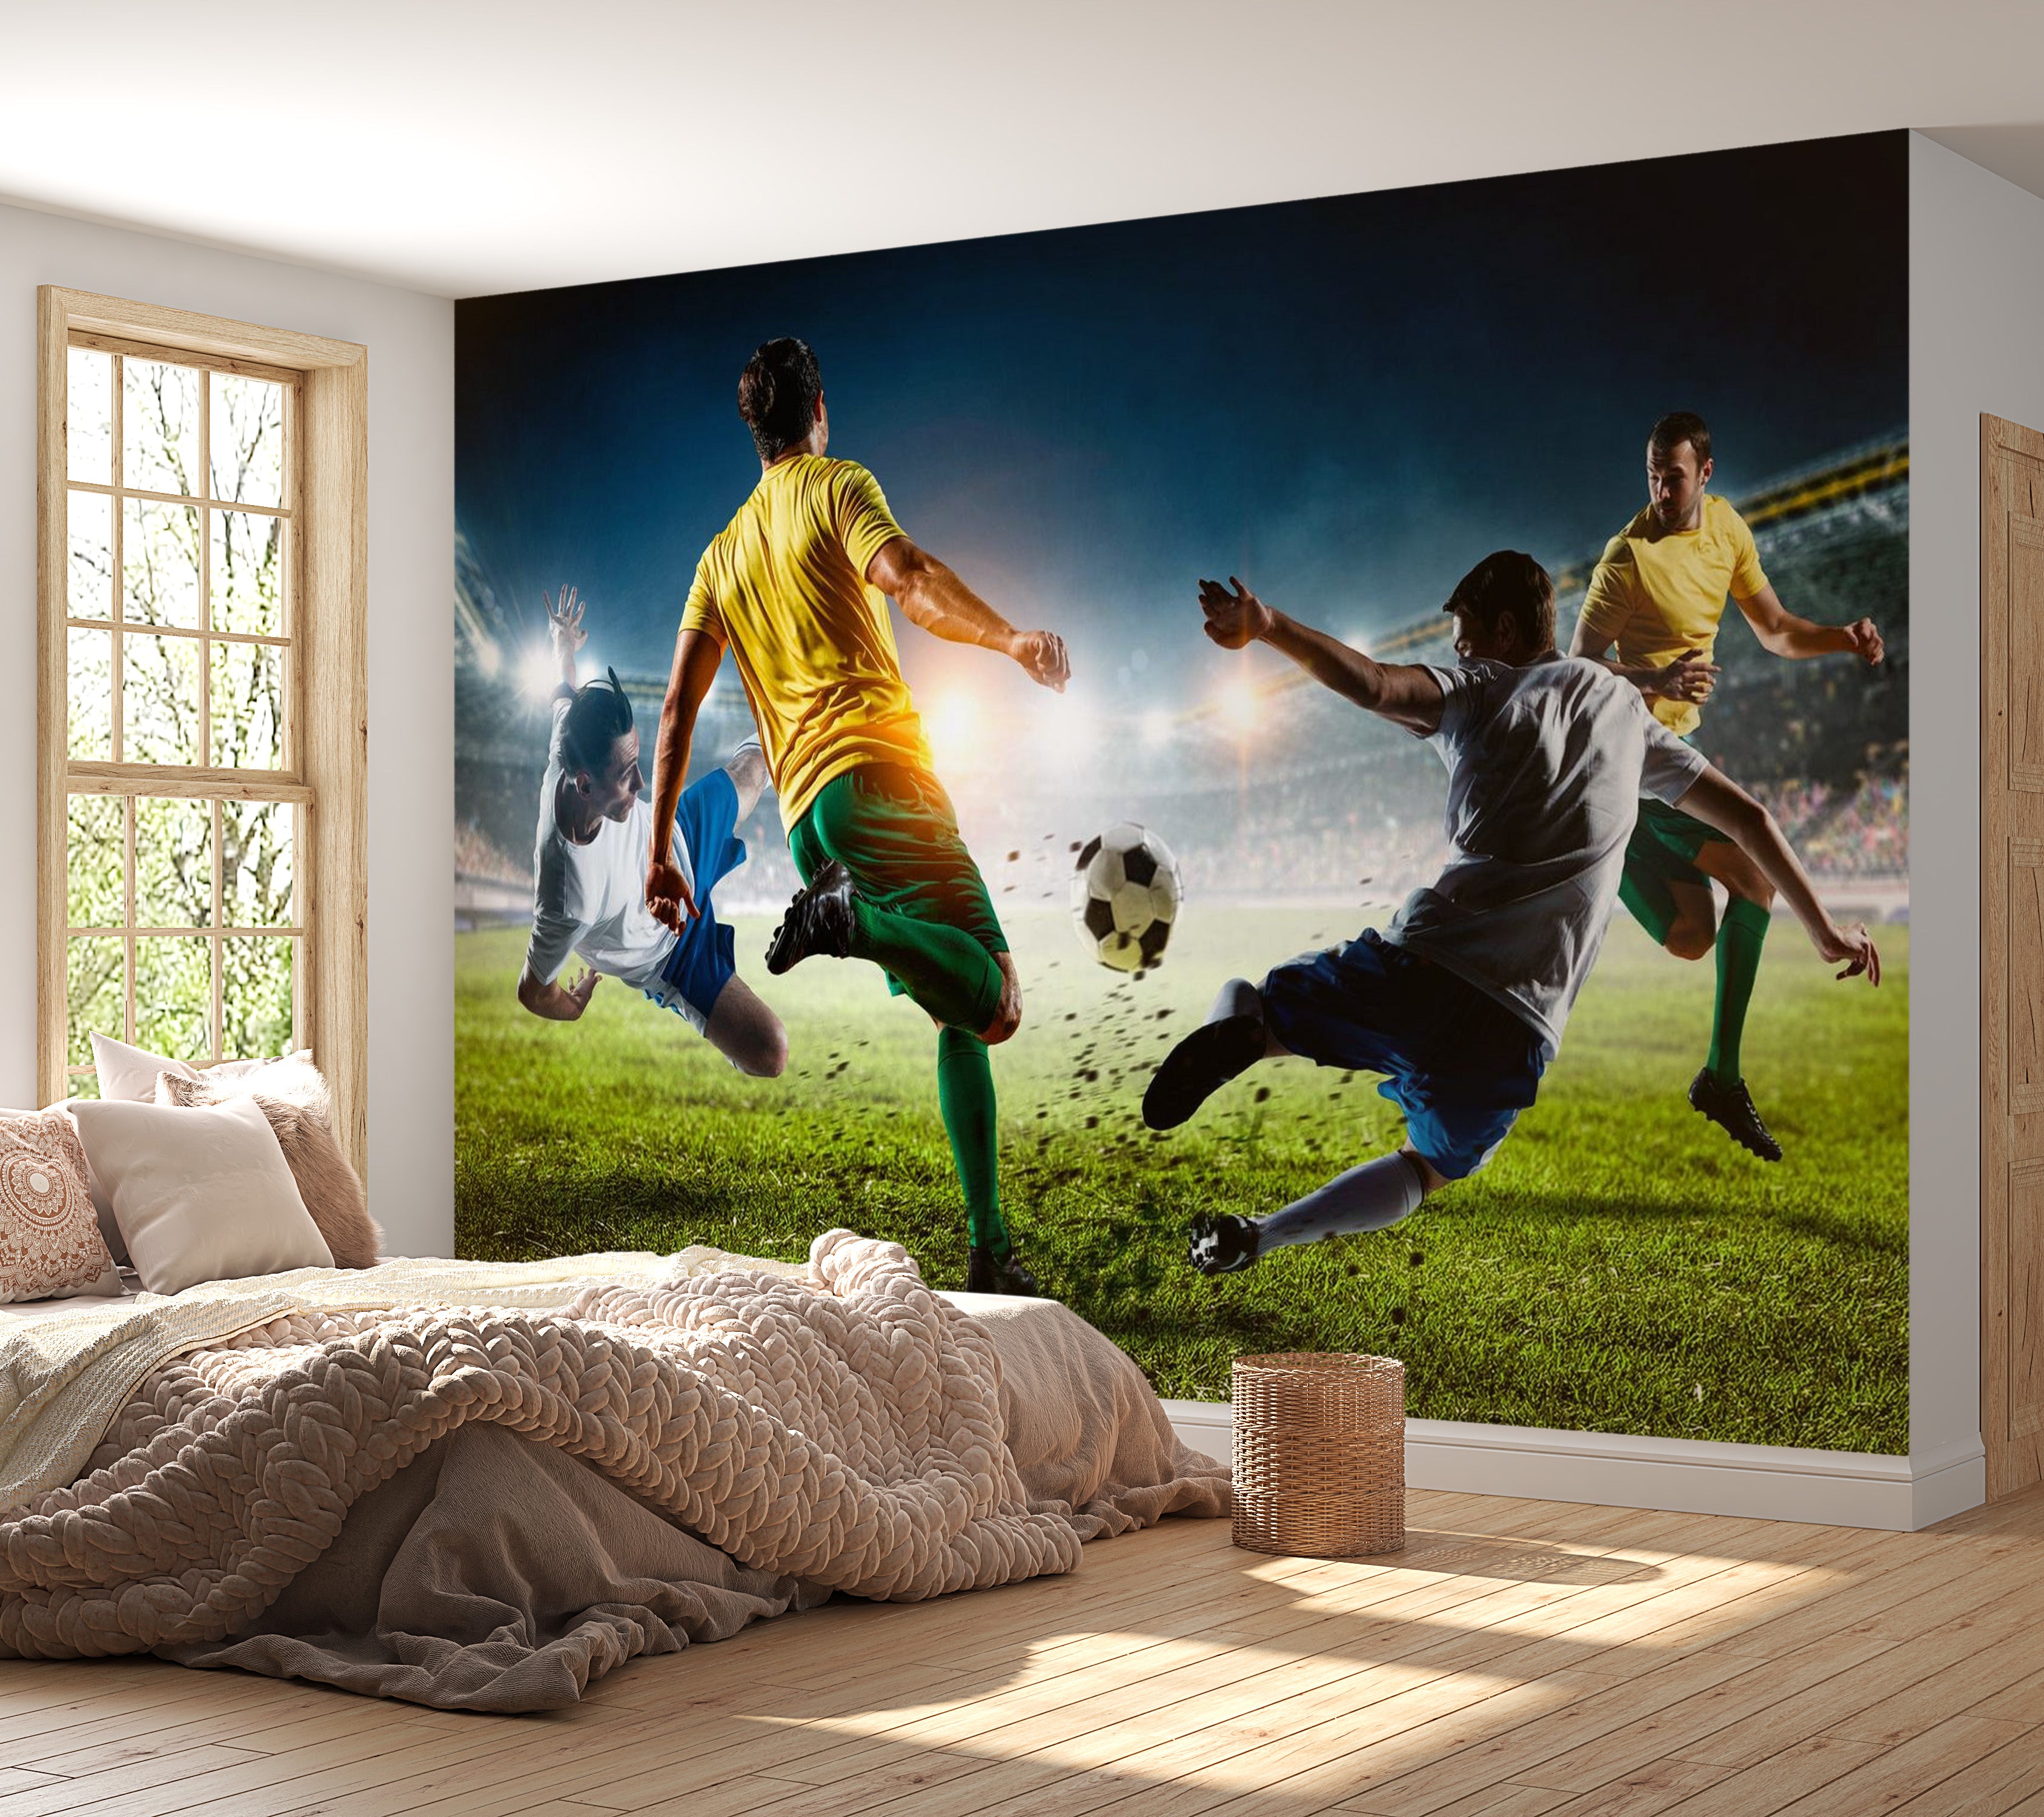 Peel & Stick Football Wall Mural - Playing Football - Removable Wall Decals